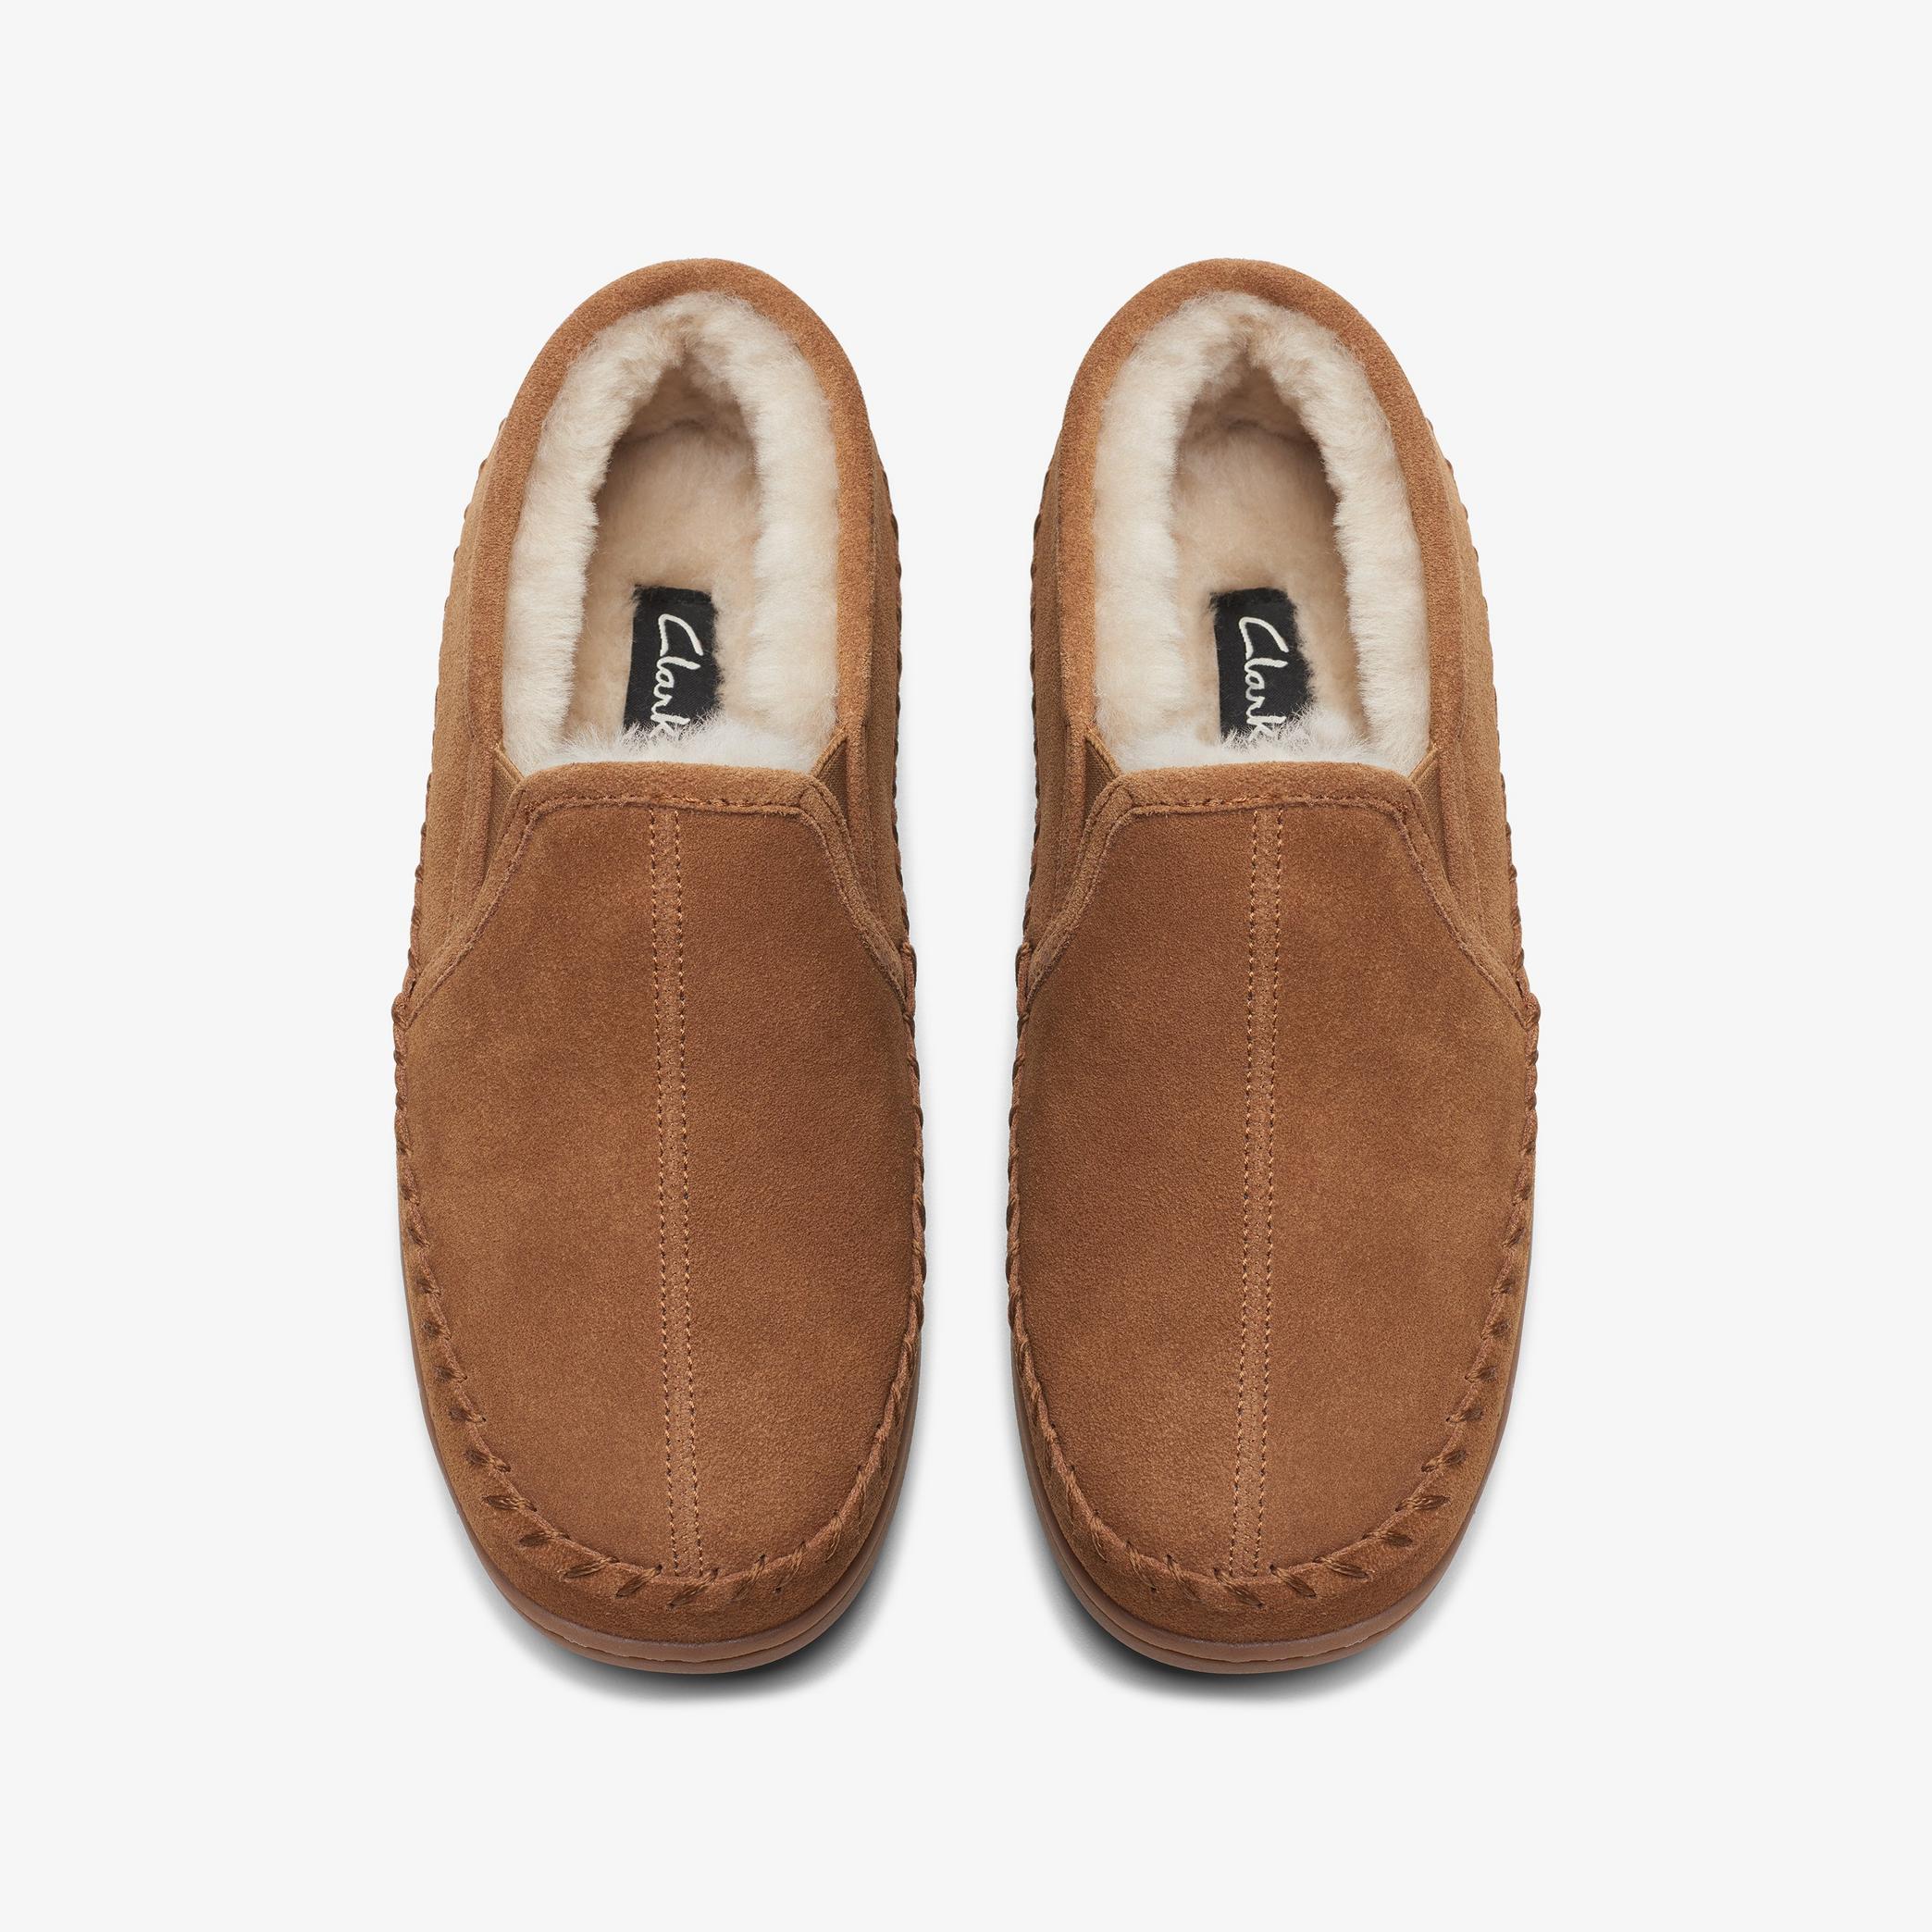 Challen Rise Tan Suede Slip Ons, view 6 of 6